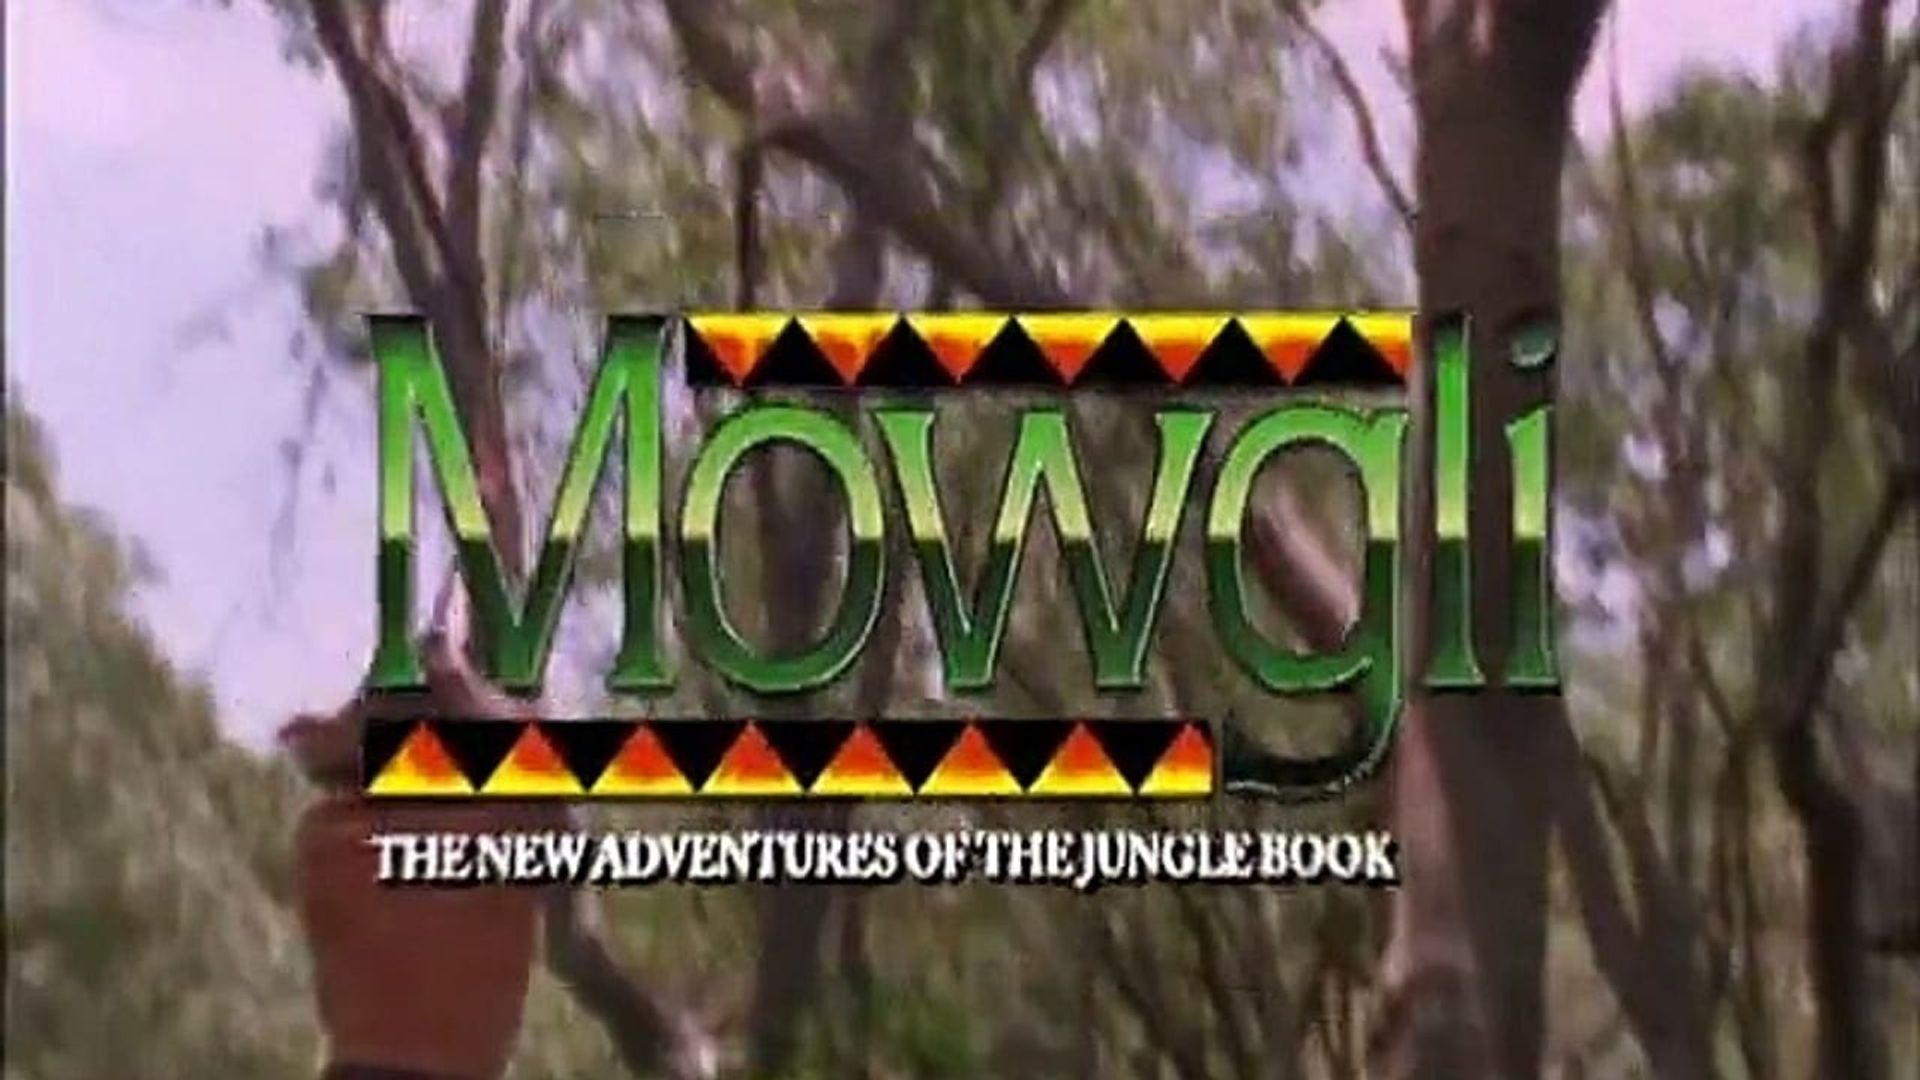 Mowgli: The New Adventures of the Jungle Book background